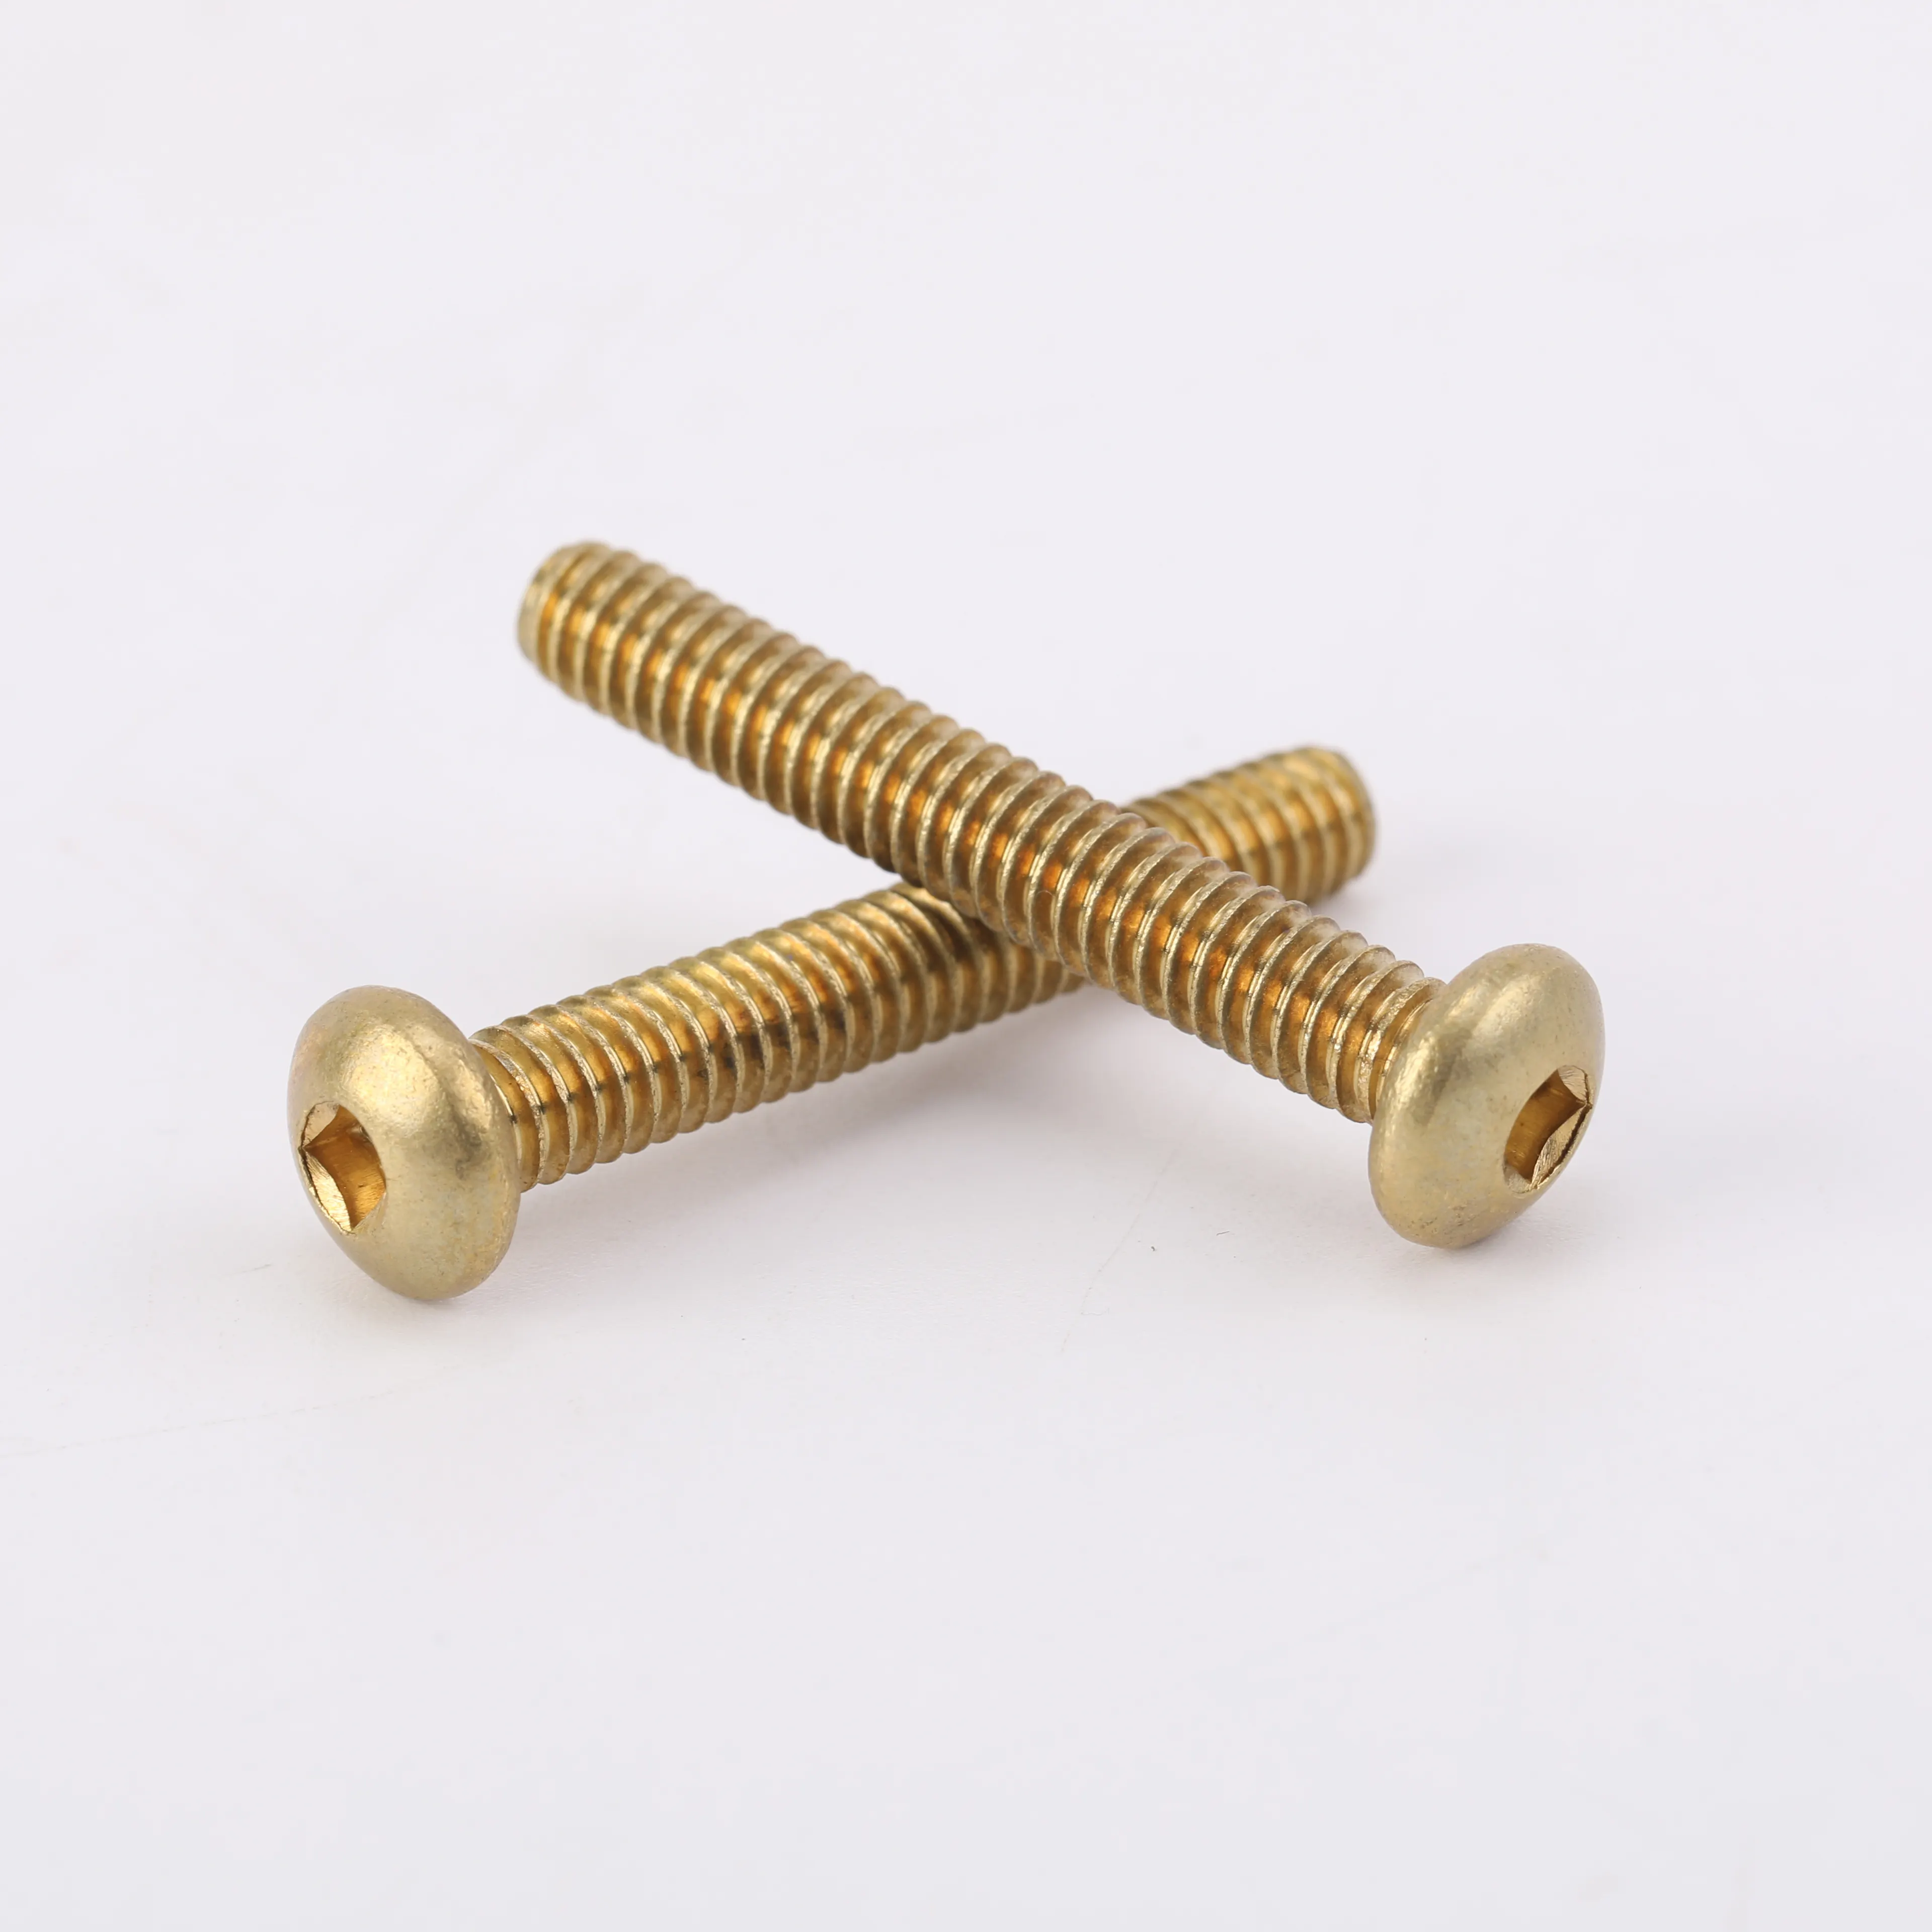 Brass Copper Screw Rivet Metal Nipple Stainless Steel Bolt And Nut-High Quality Screws